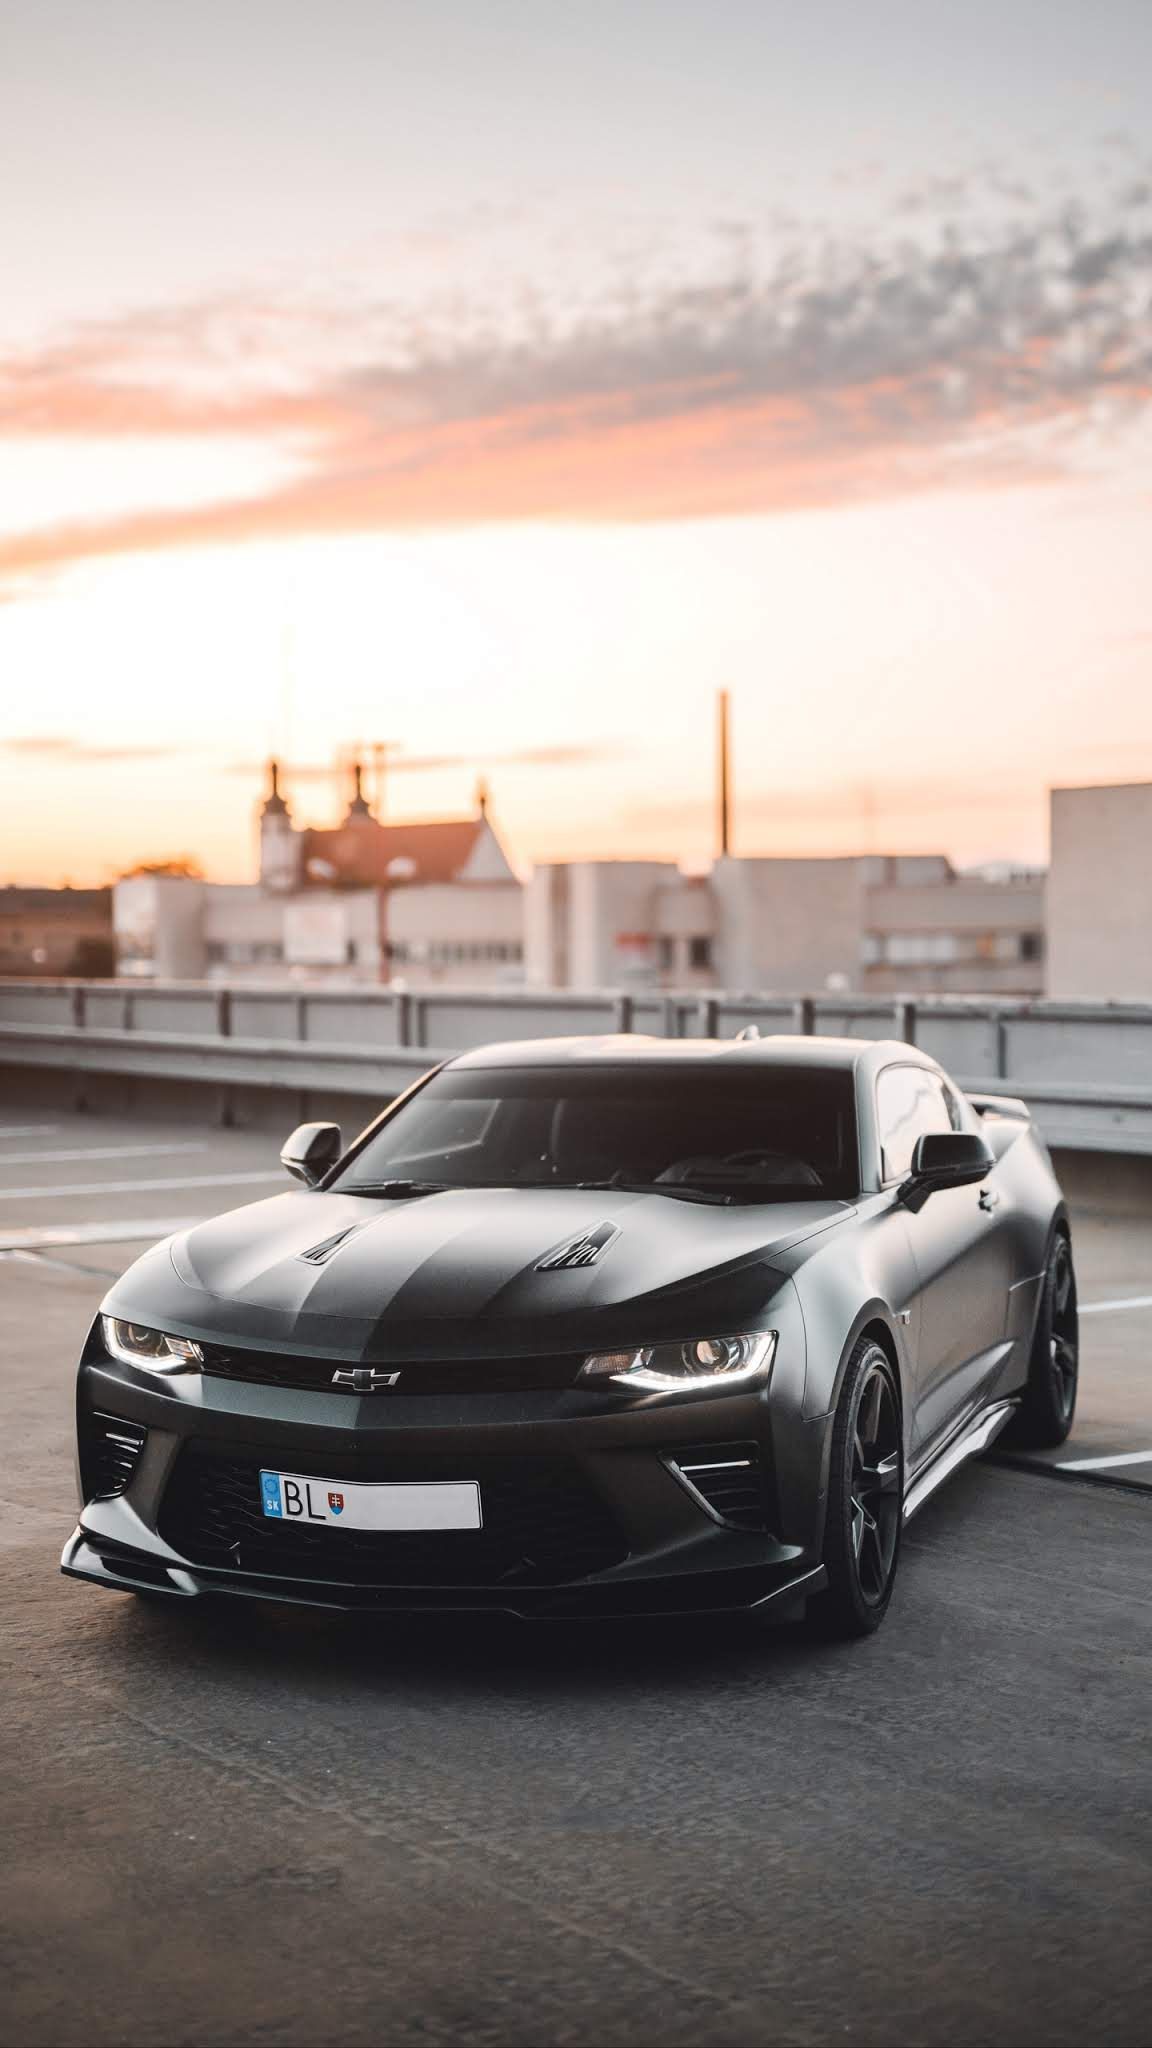 Chevy Camaro Mobile Wallpapers - Wallpaper Cave